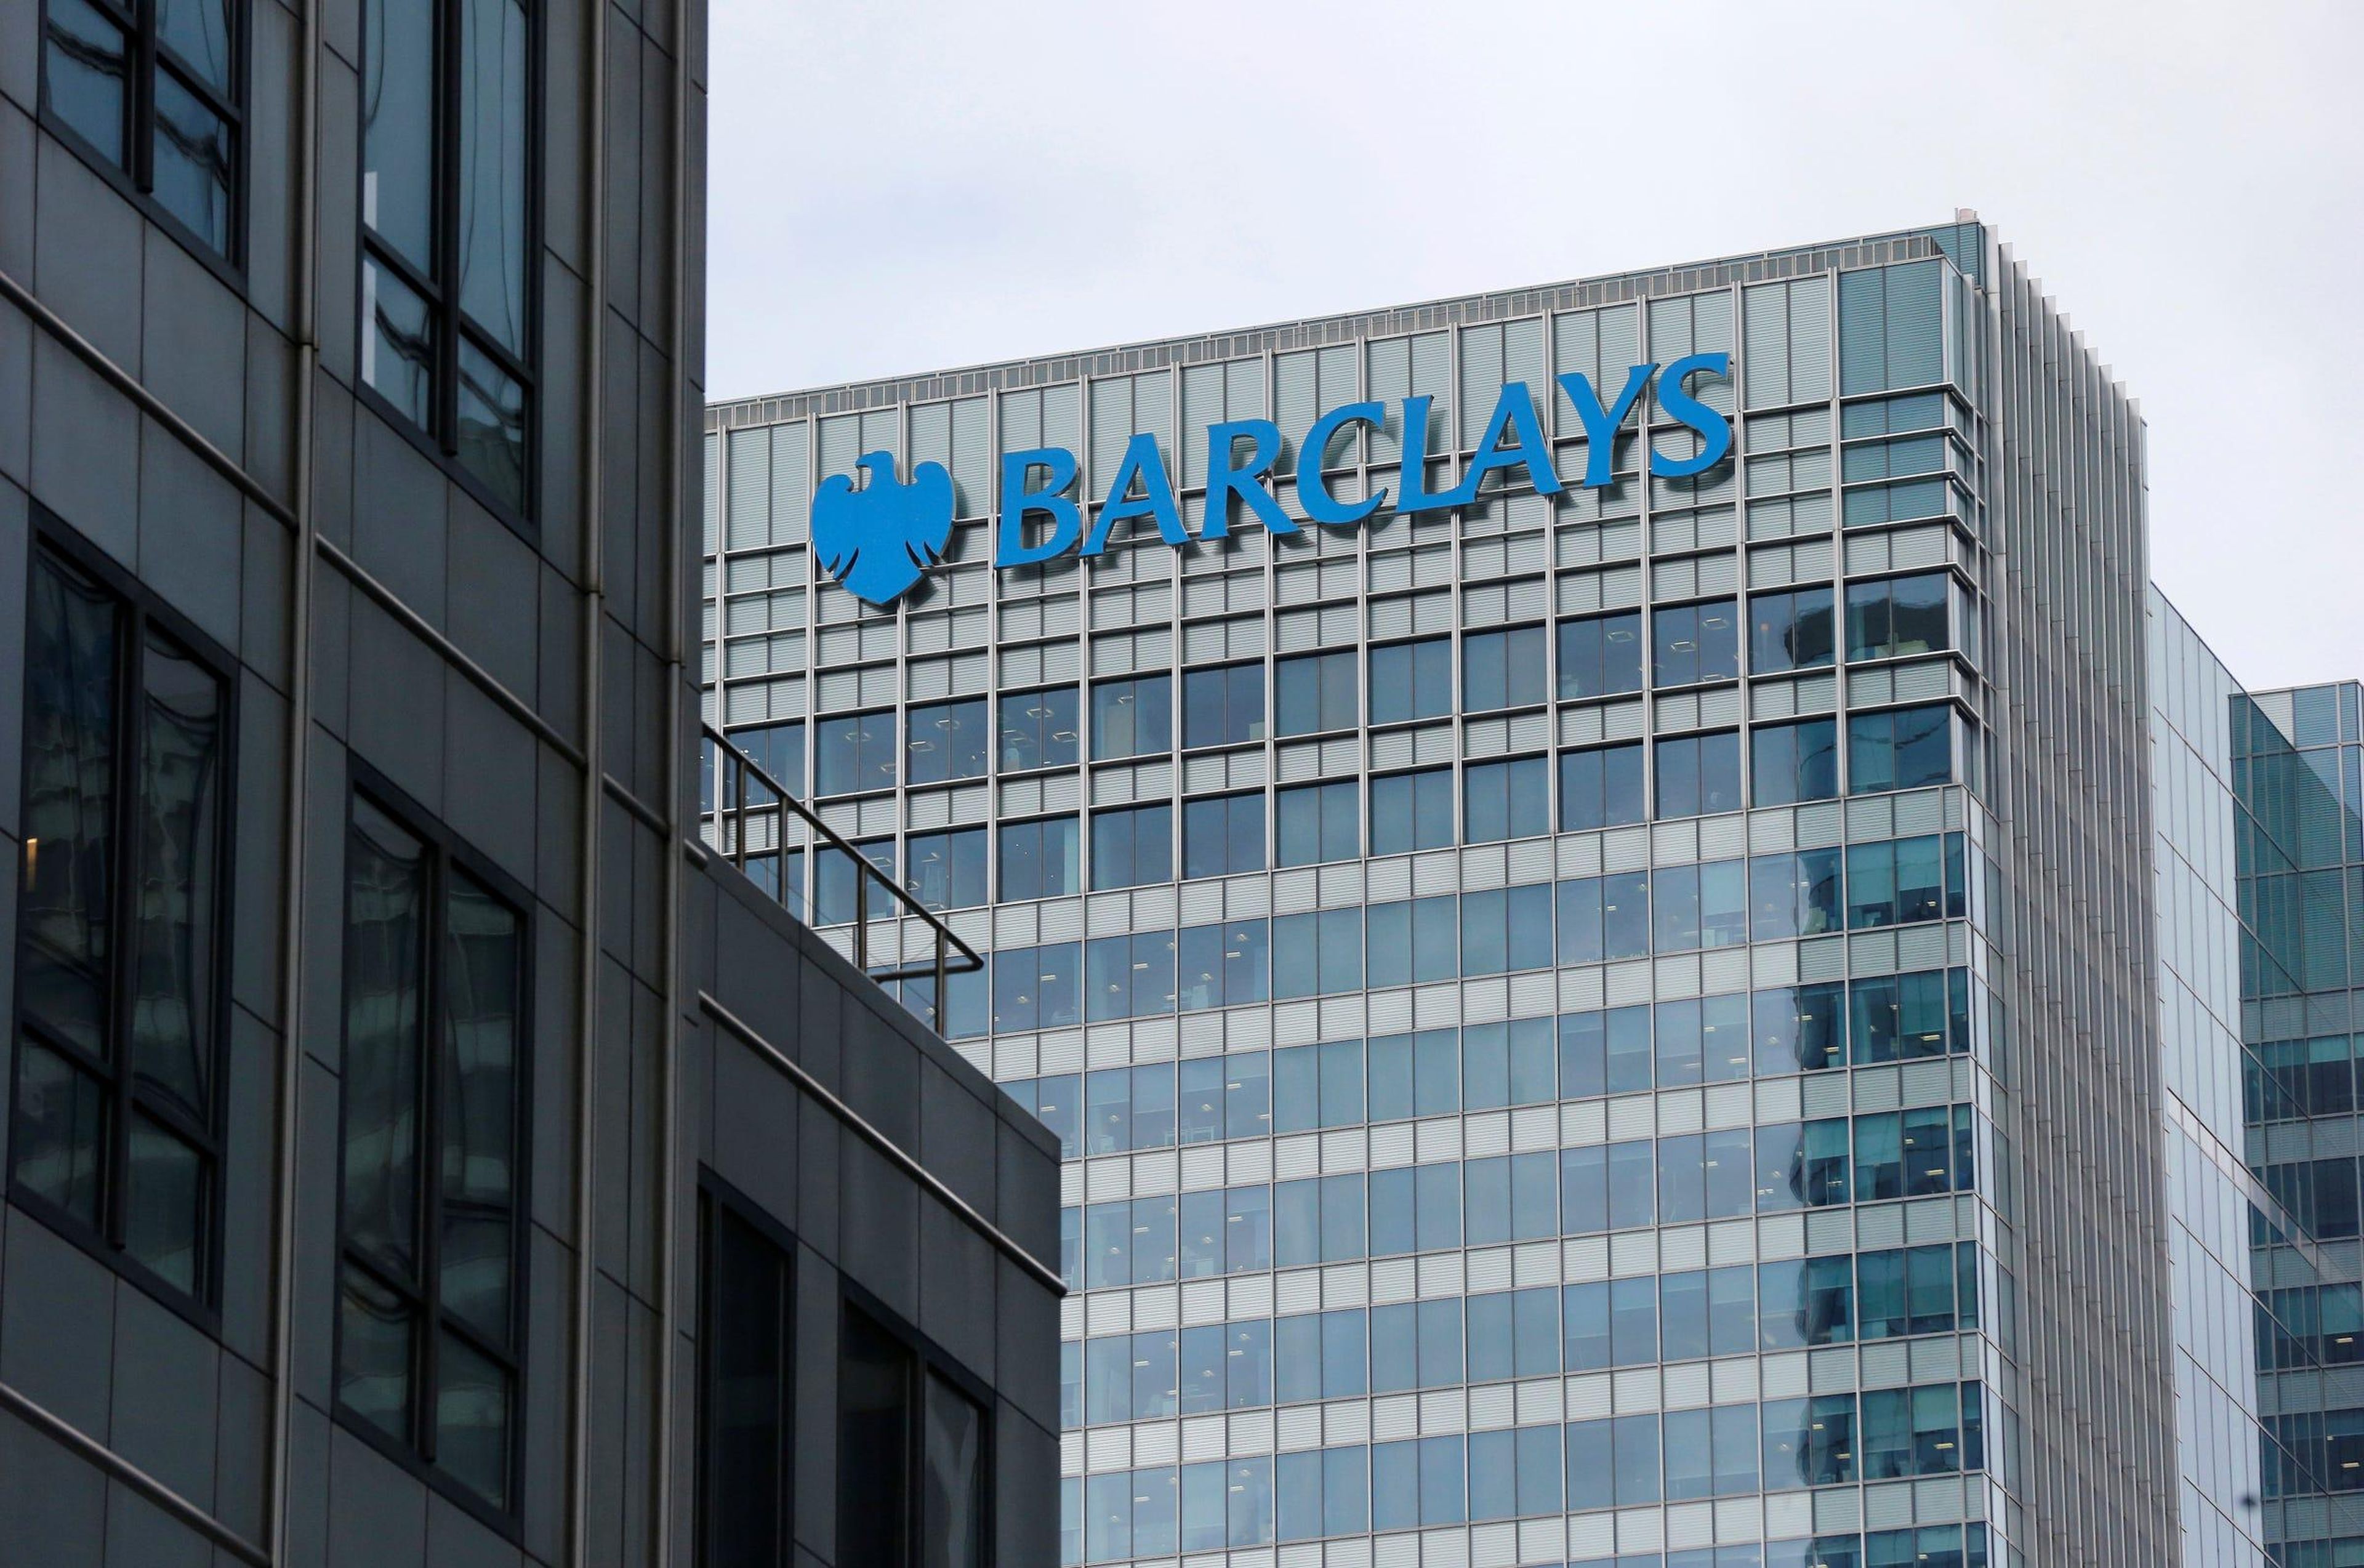 A Barclays bank office is seen at Canary Wharf in London. Reuters